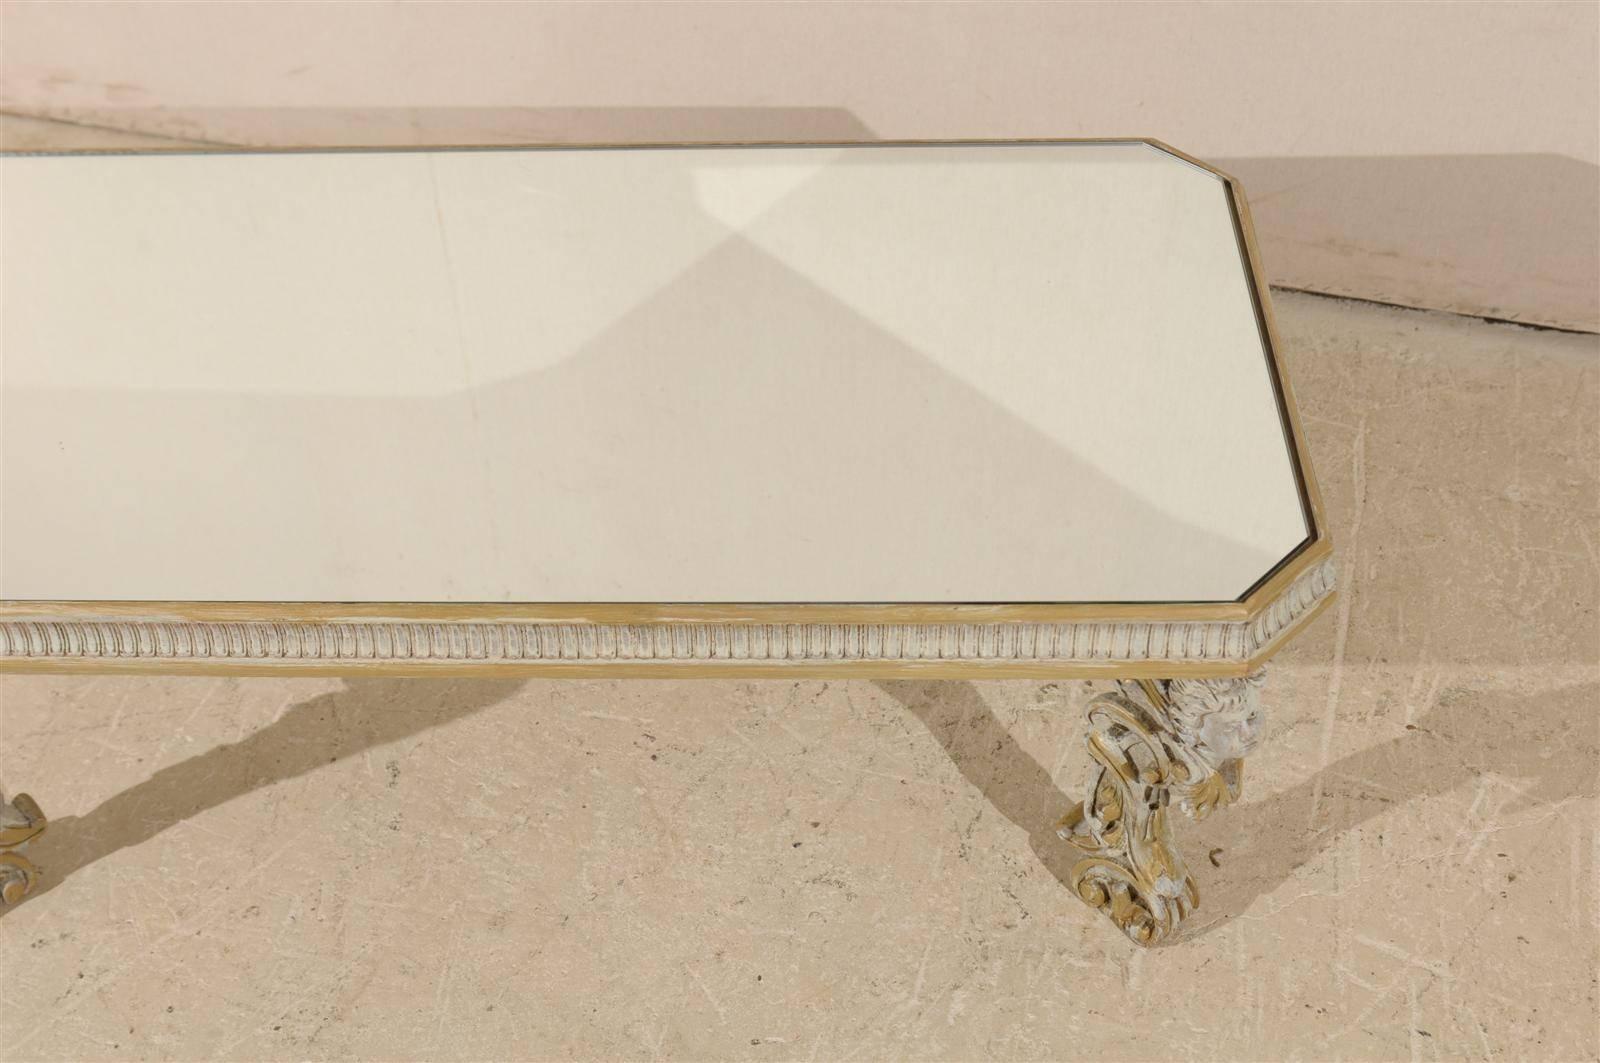 Italian Mirrored Top Coffee Table with Ornate Putti Carved Legs, Circa 1920s In Good Condition For Sale In Atlanta, GA